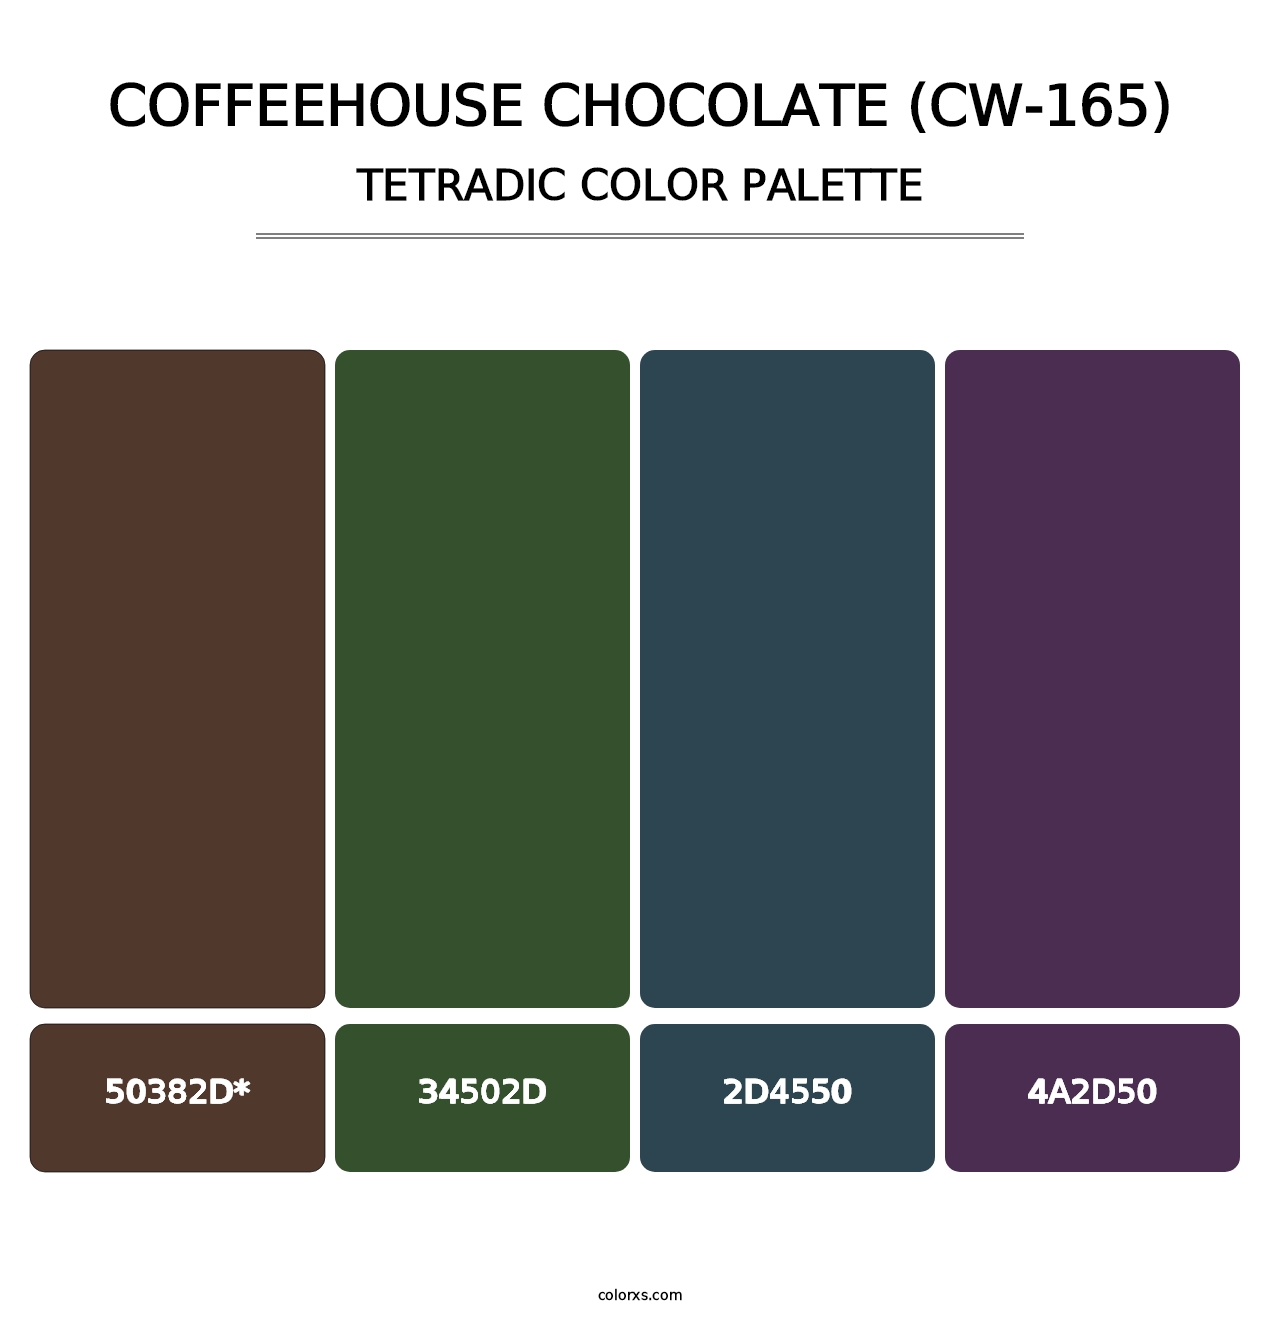 Coffeehouse Chocolate (CW-165) - Tetradic Color Palette